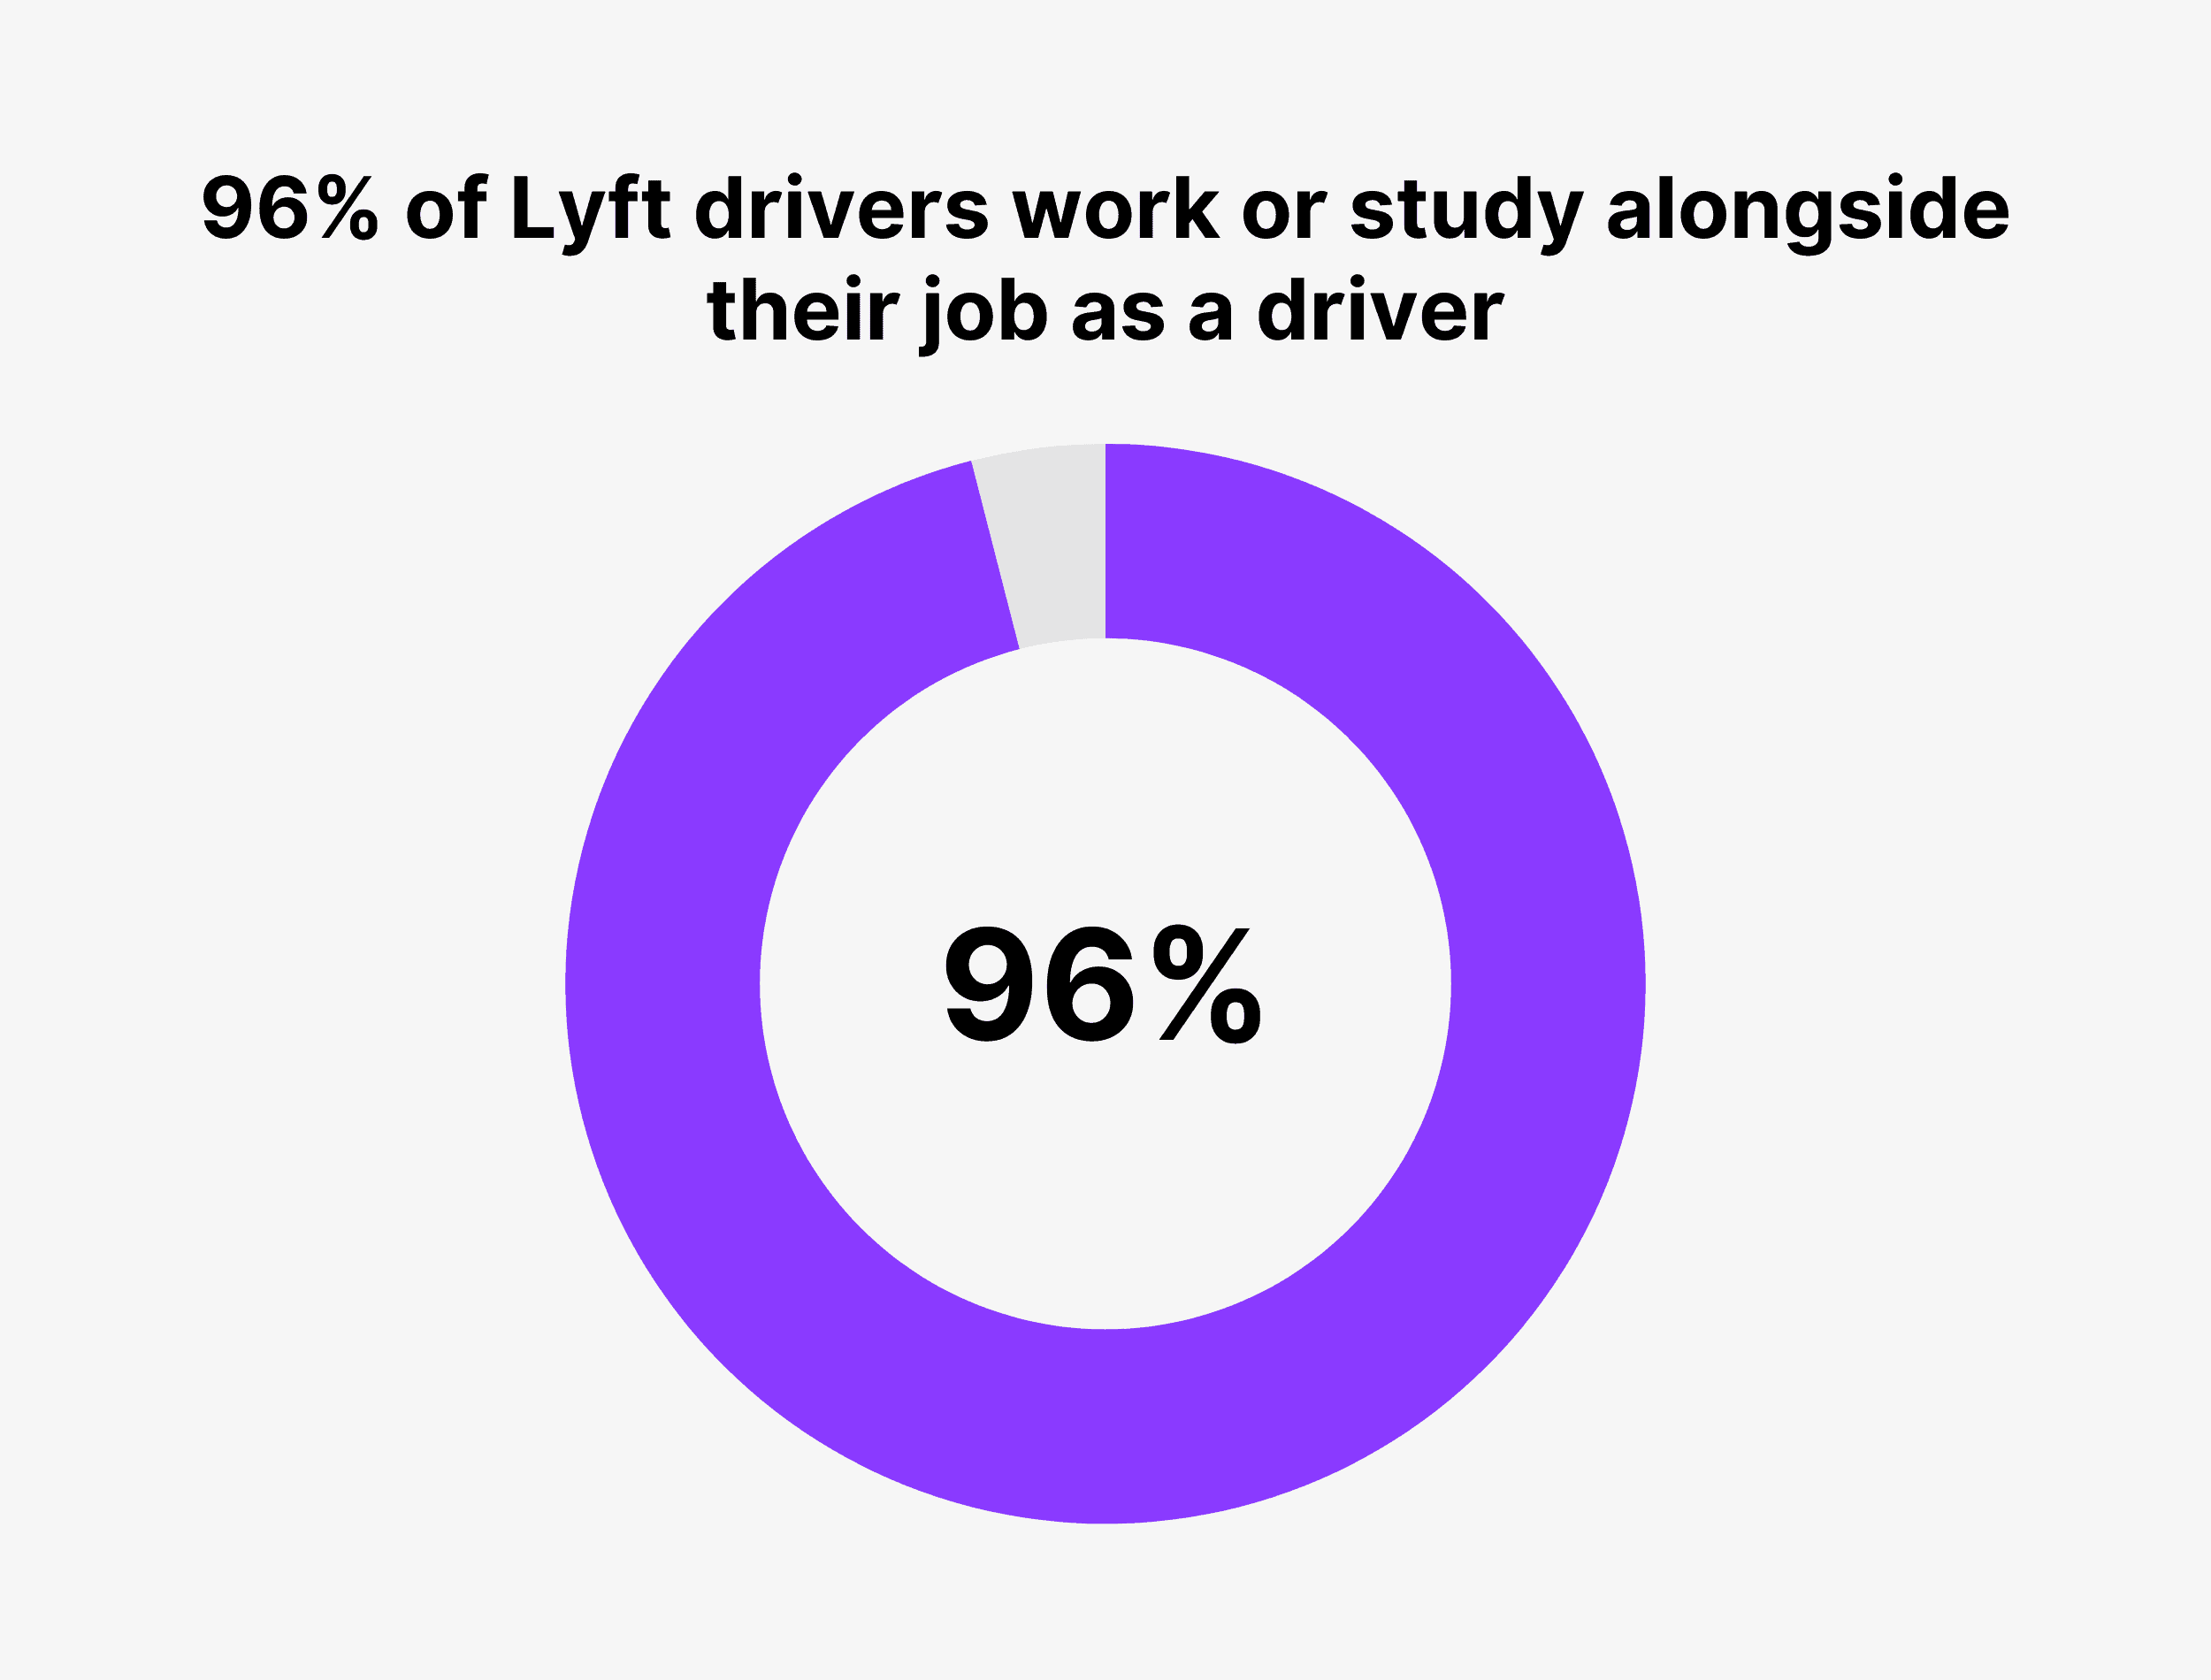 96% of Lyft drivers work or study alongside their job as a driver